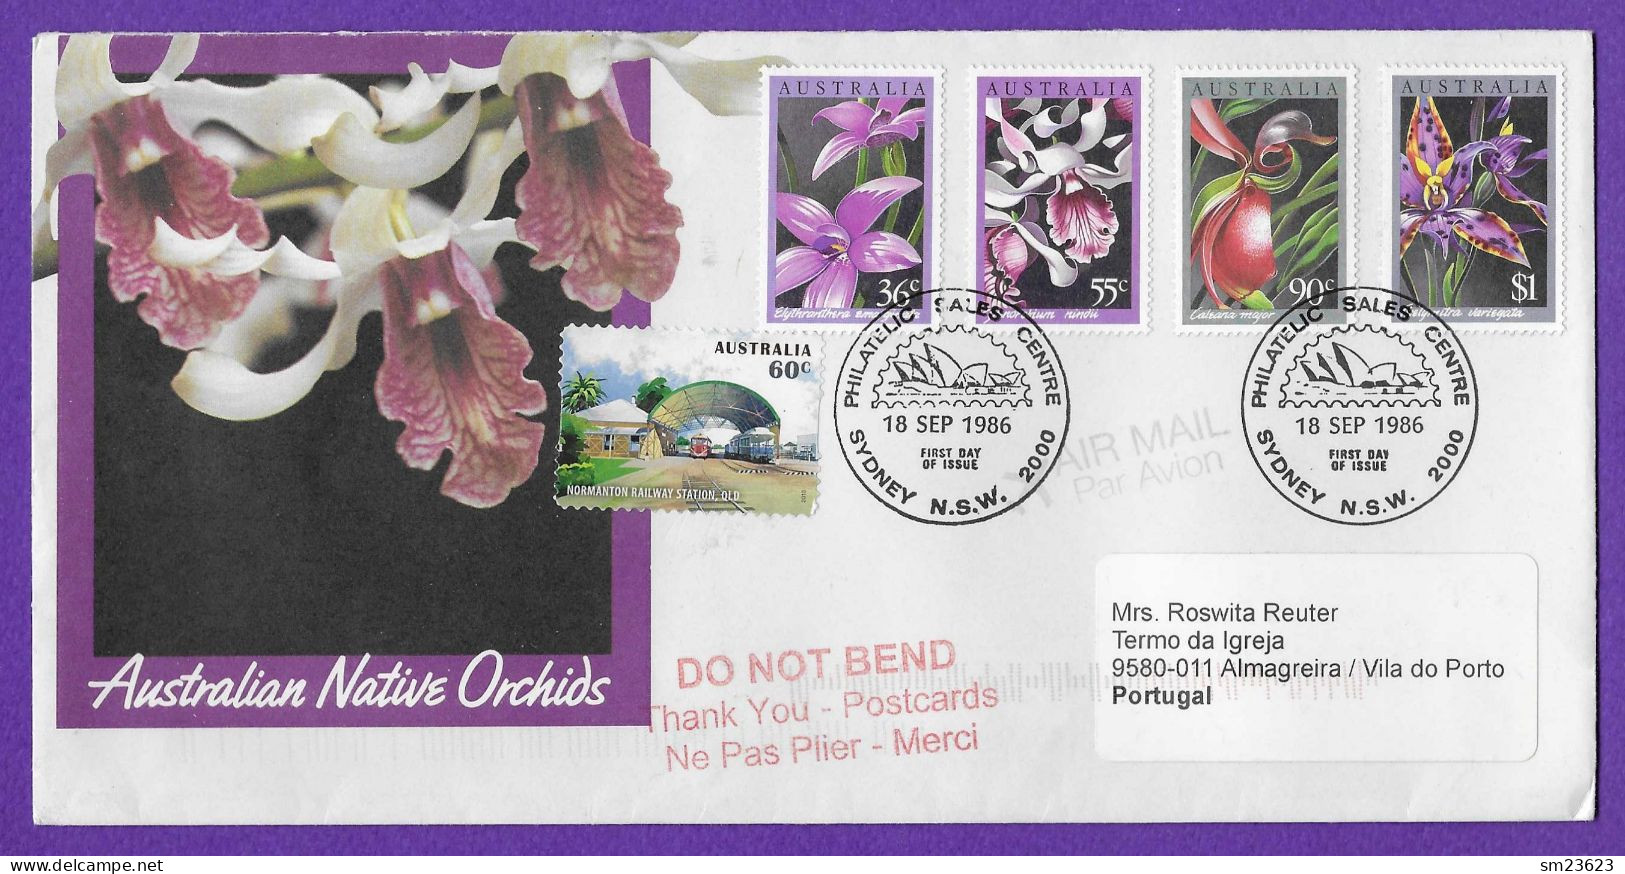 Australien 1986  Mi.Nr. 997 / 1000 , Orchideen - First Day Of Issue 18 SEP 1986 - Premiers Jours (FDC)